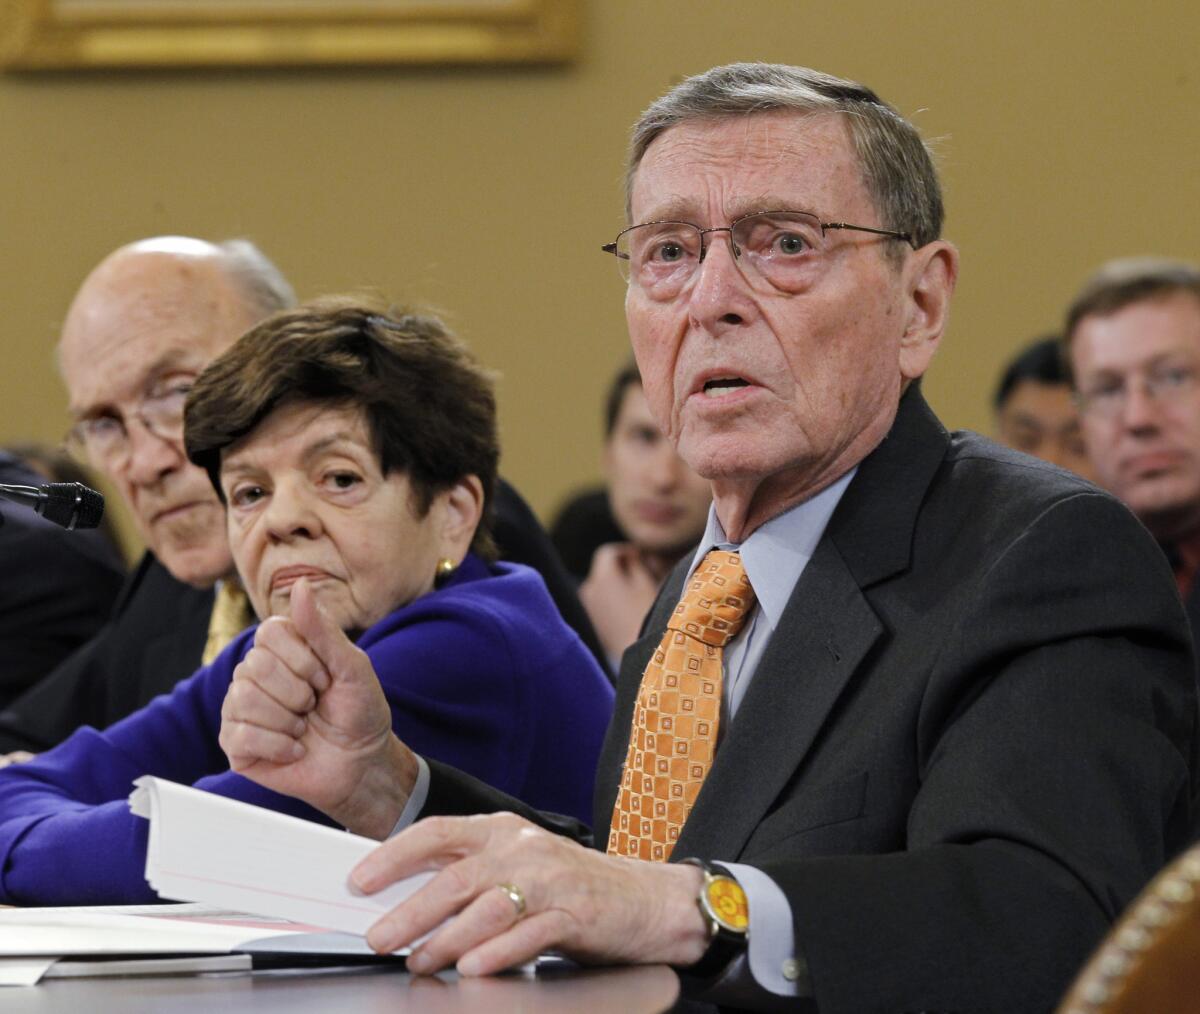 Alice Rivlin, a distinguished budget expert at the Brookings Institution, in 2011, flanked by former Sens. Alan Simpson (R-Wyo.) and Pete Domenici (R-N.M.).